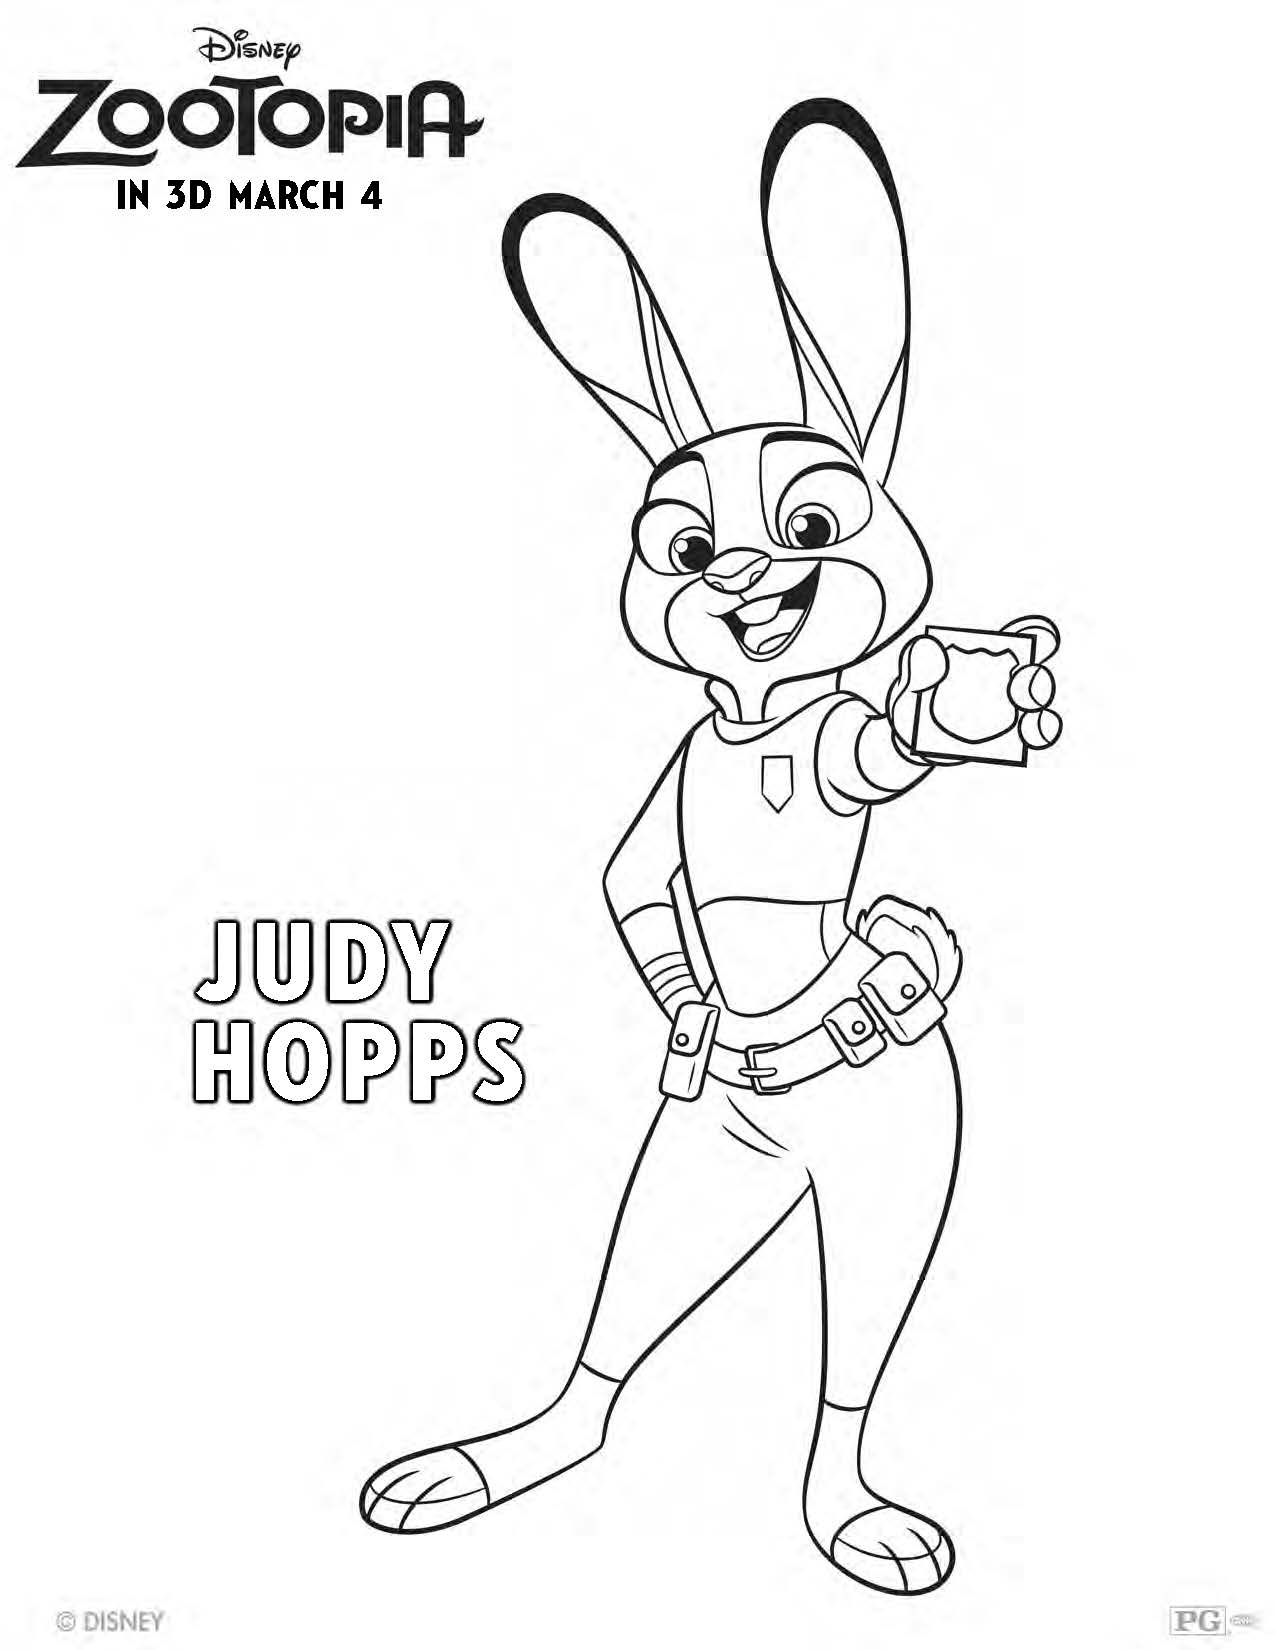 July Hopps - Free Zootopia Coloring Pages and Activity Sheets